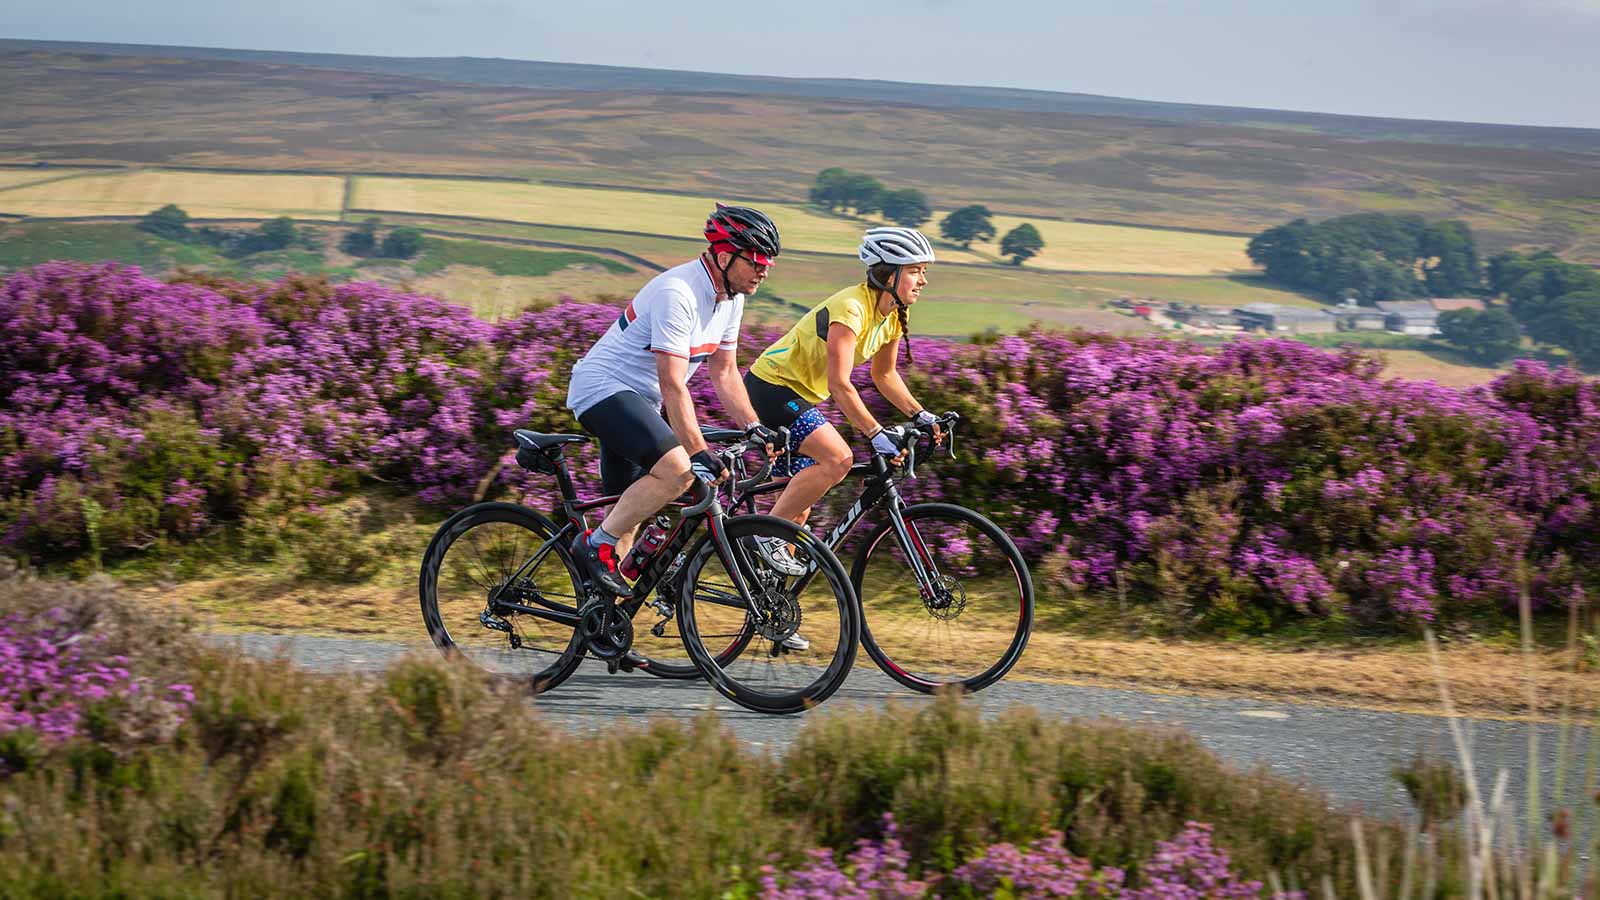 Cycling in North Yorkshire's Countryside